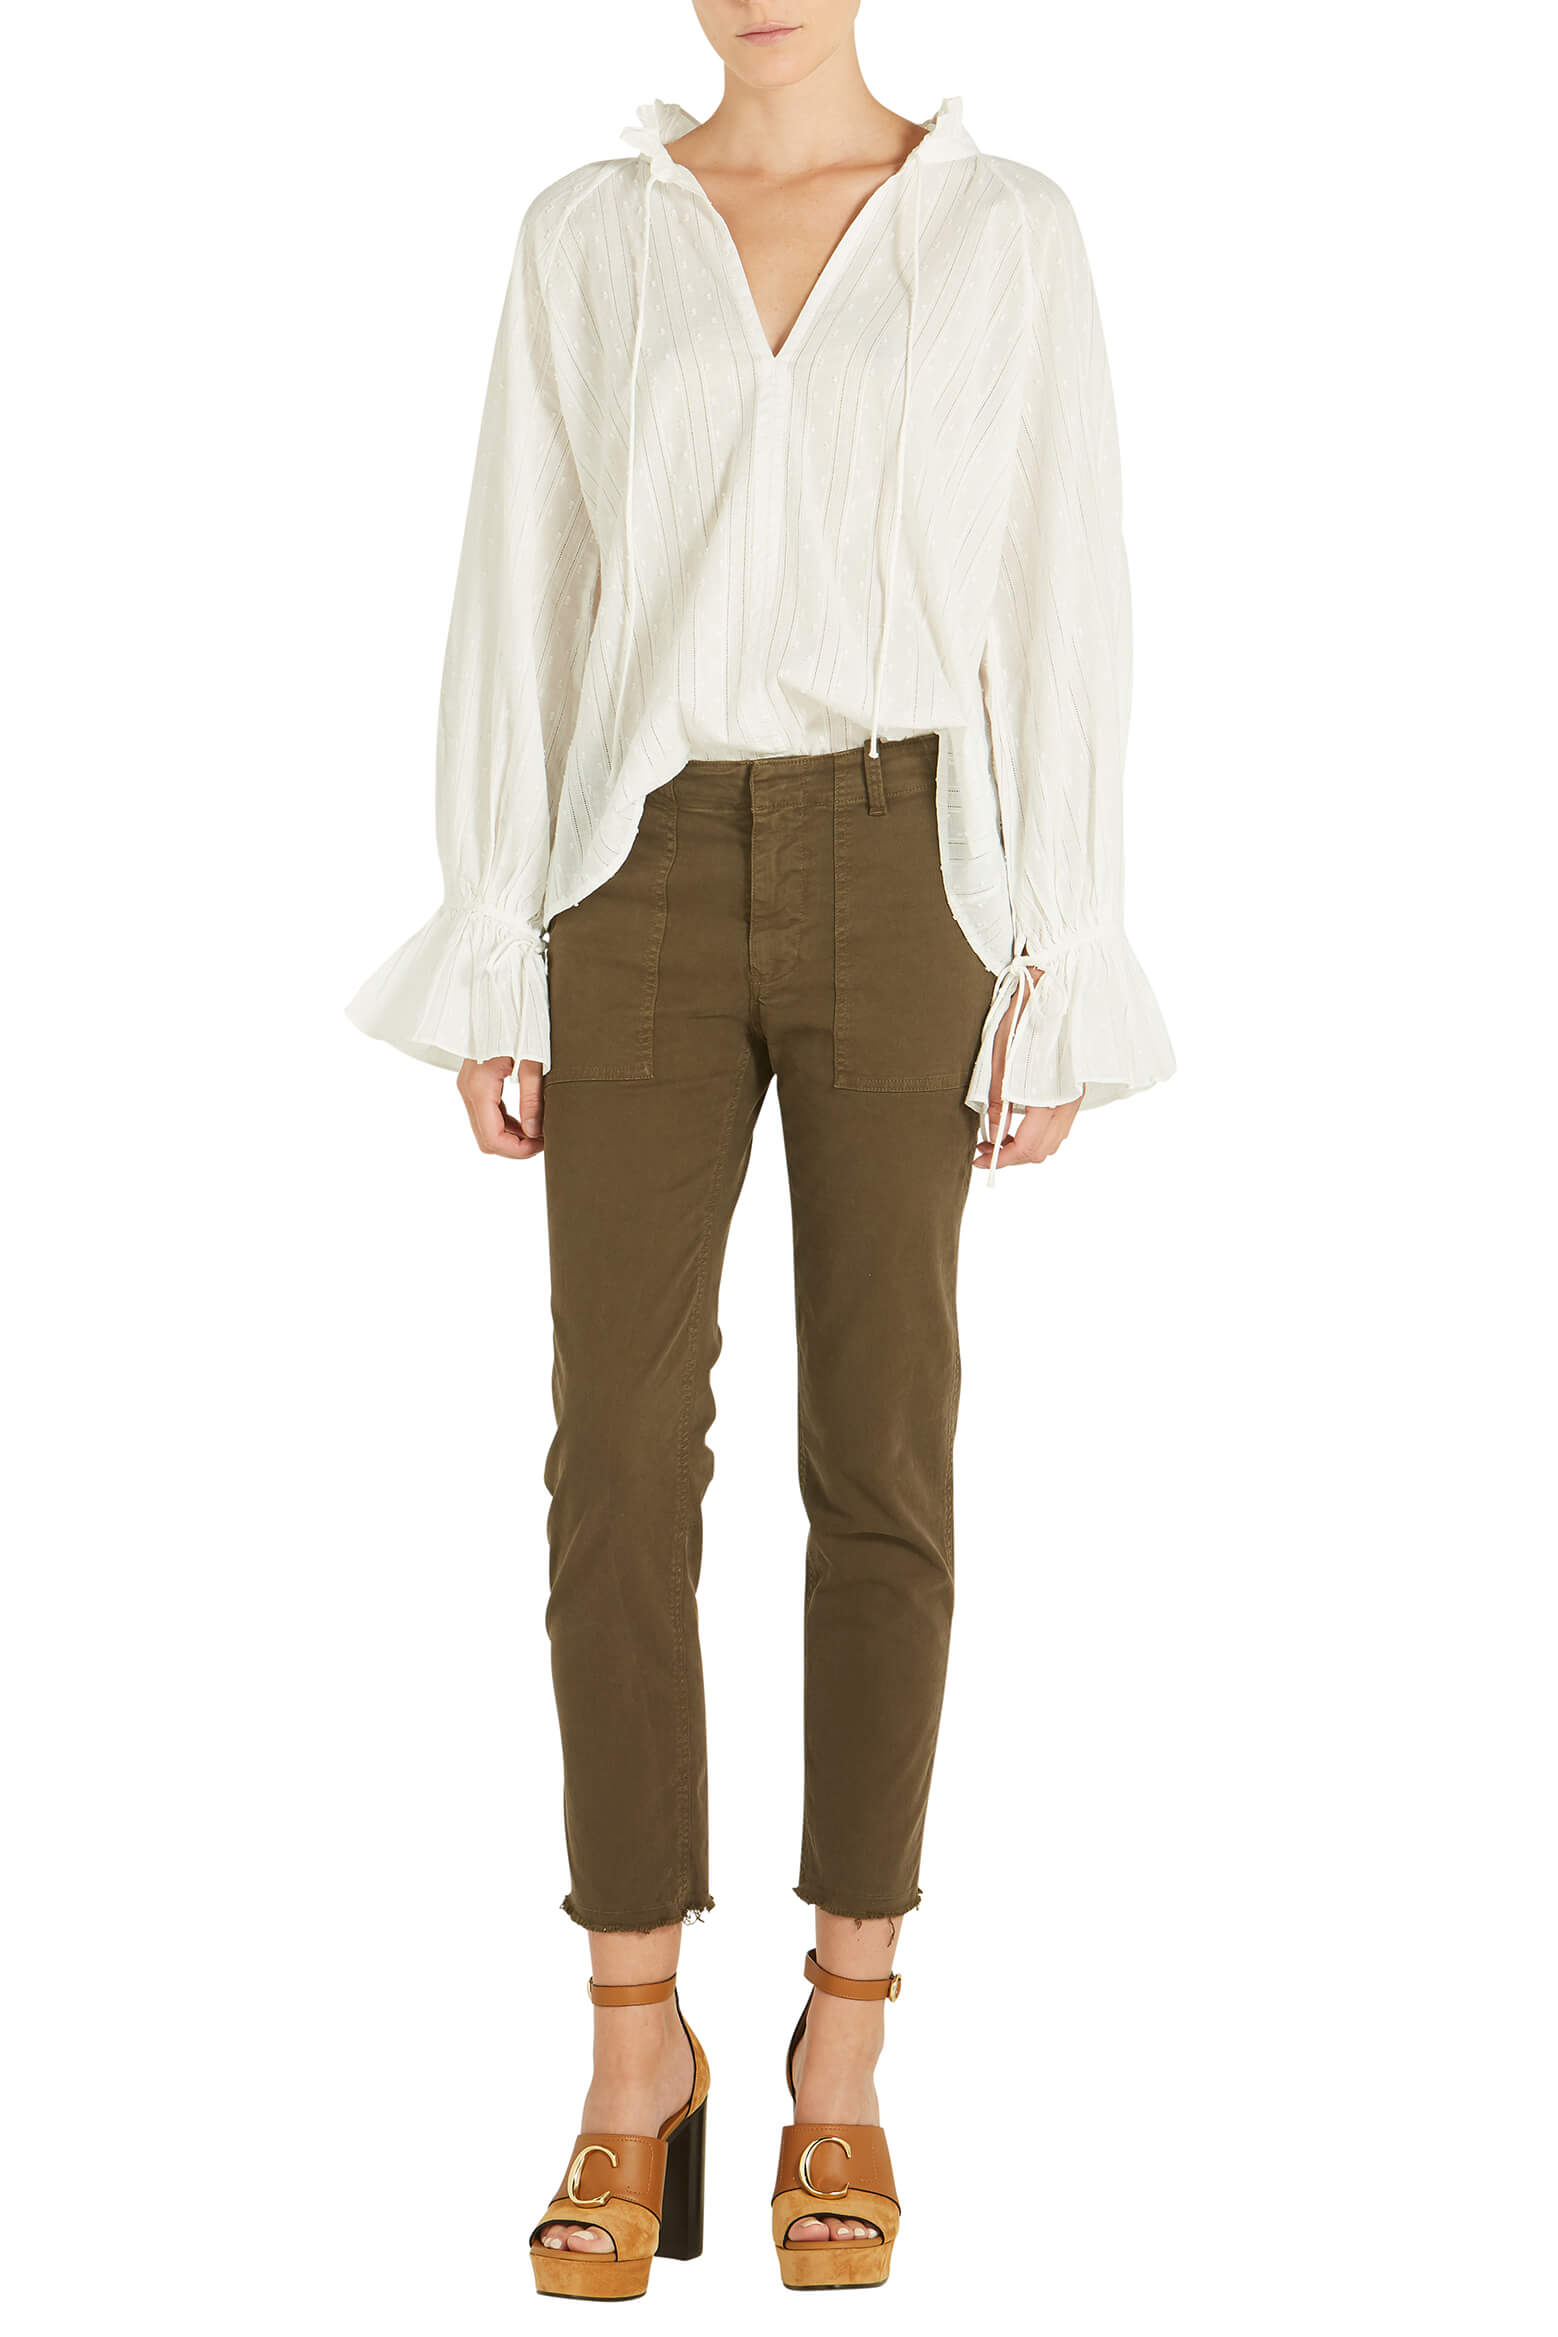 Nili Lotan Thelina Top in Ivory from The New Trend